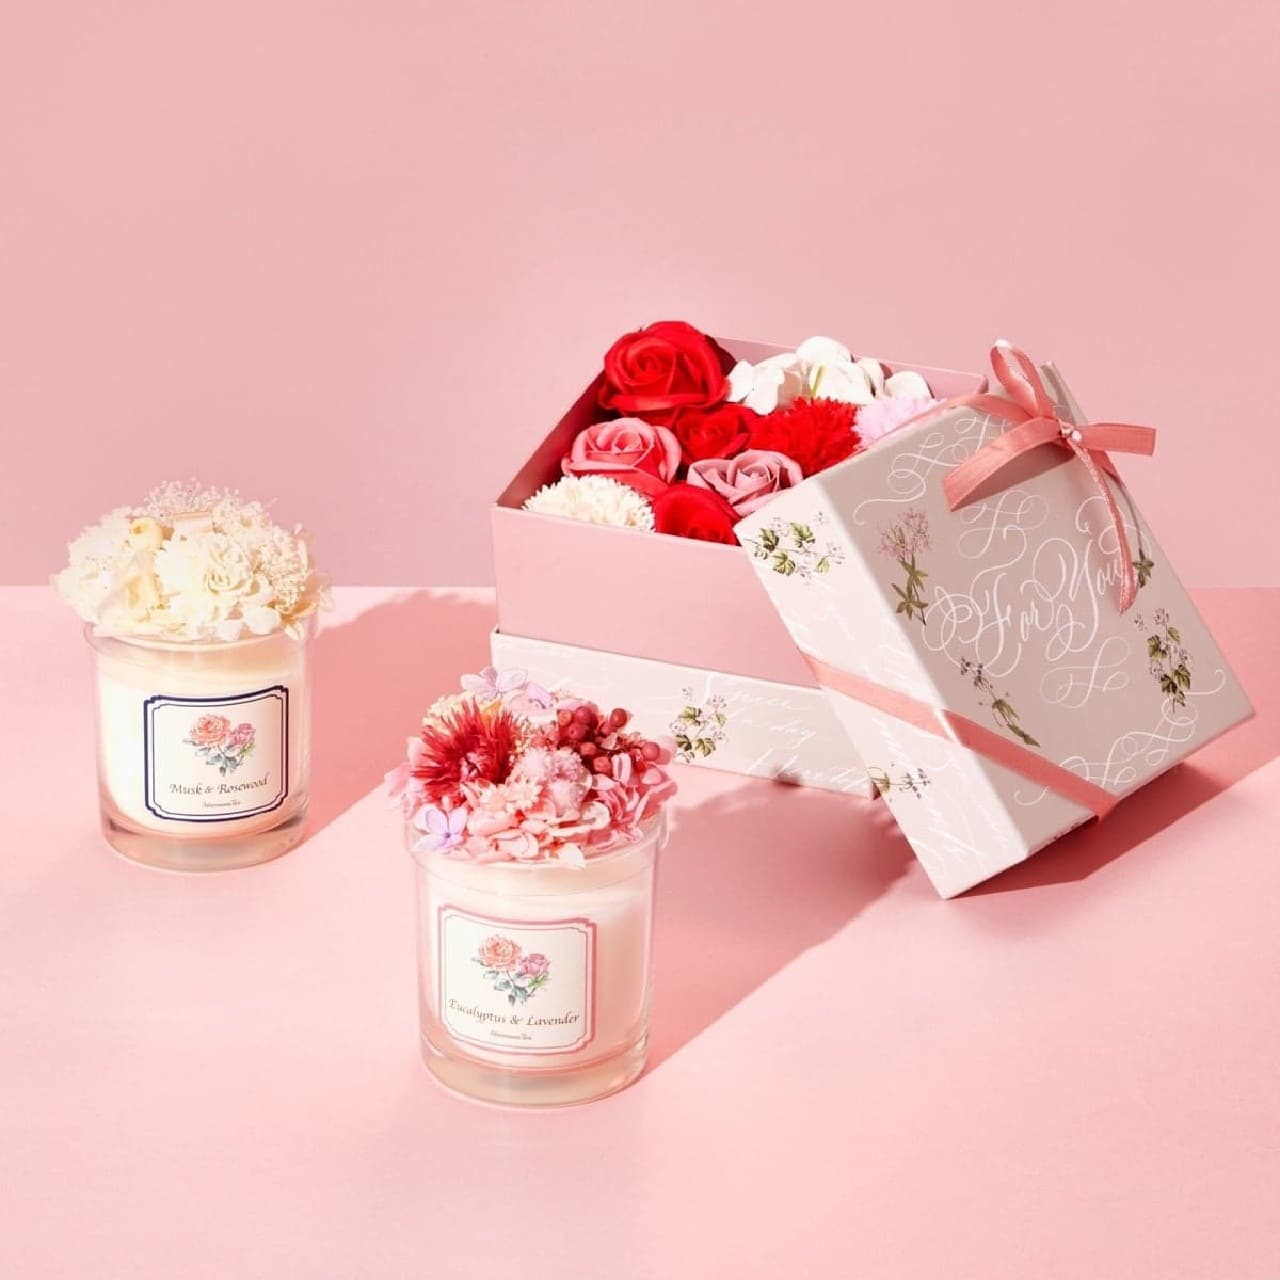 Afternoon Tea Living launches "Mom & Me." Mother's Day gift special from April 10, featuring limited wrapping and items exclusive to the online store Image 3